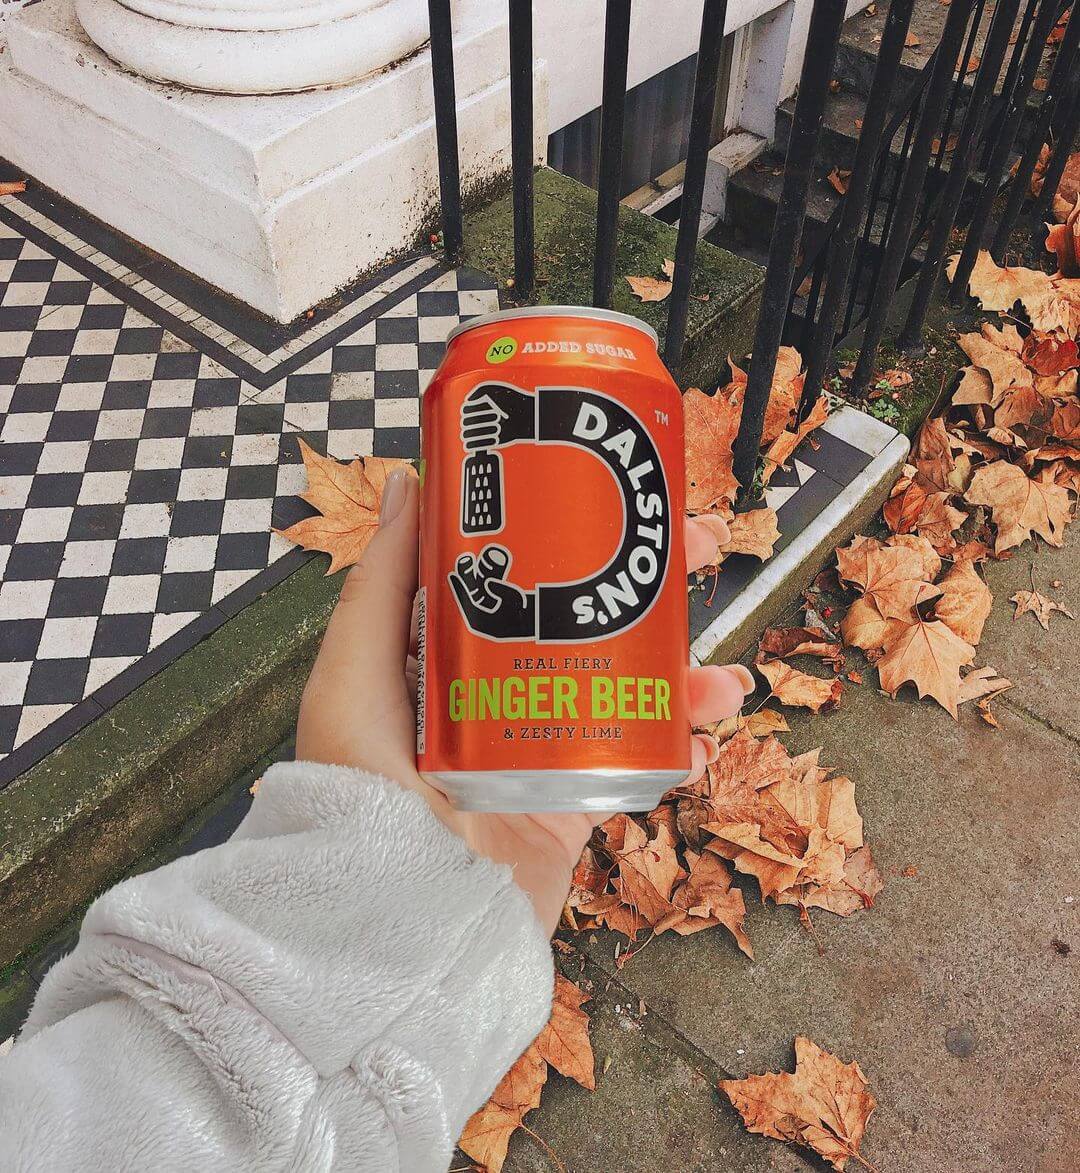 Image of Dalstons Ginger Beer made in the UK by Dalston's. Buying this product supports a UK business, jobs and the local community